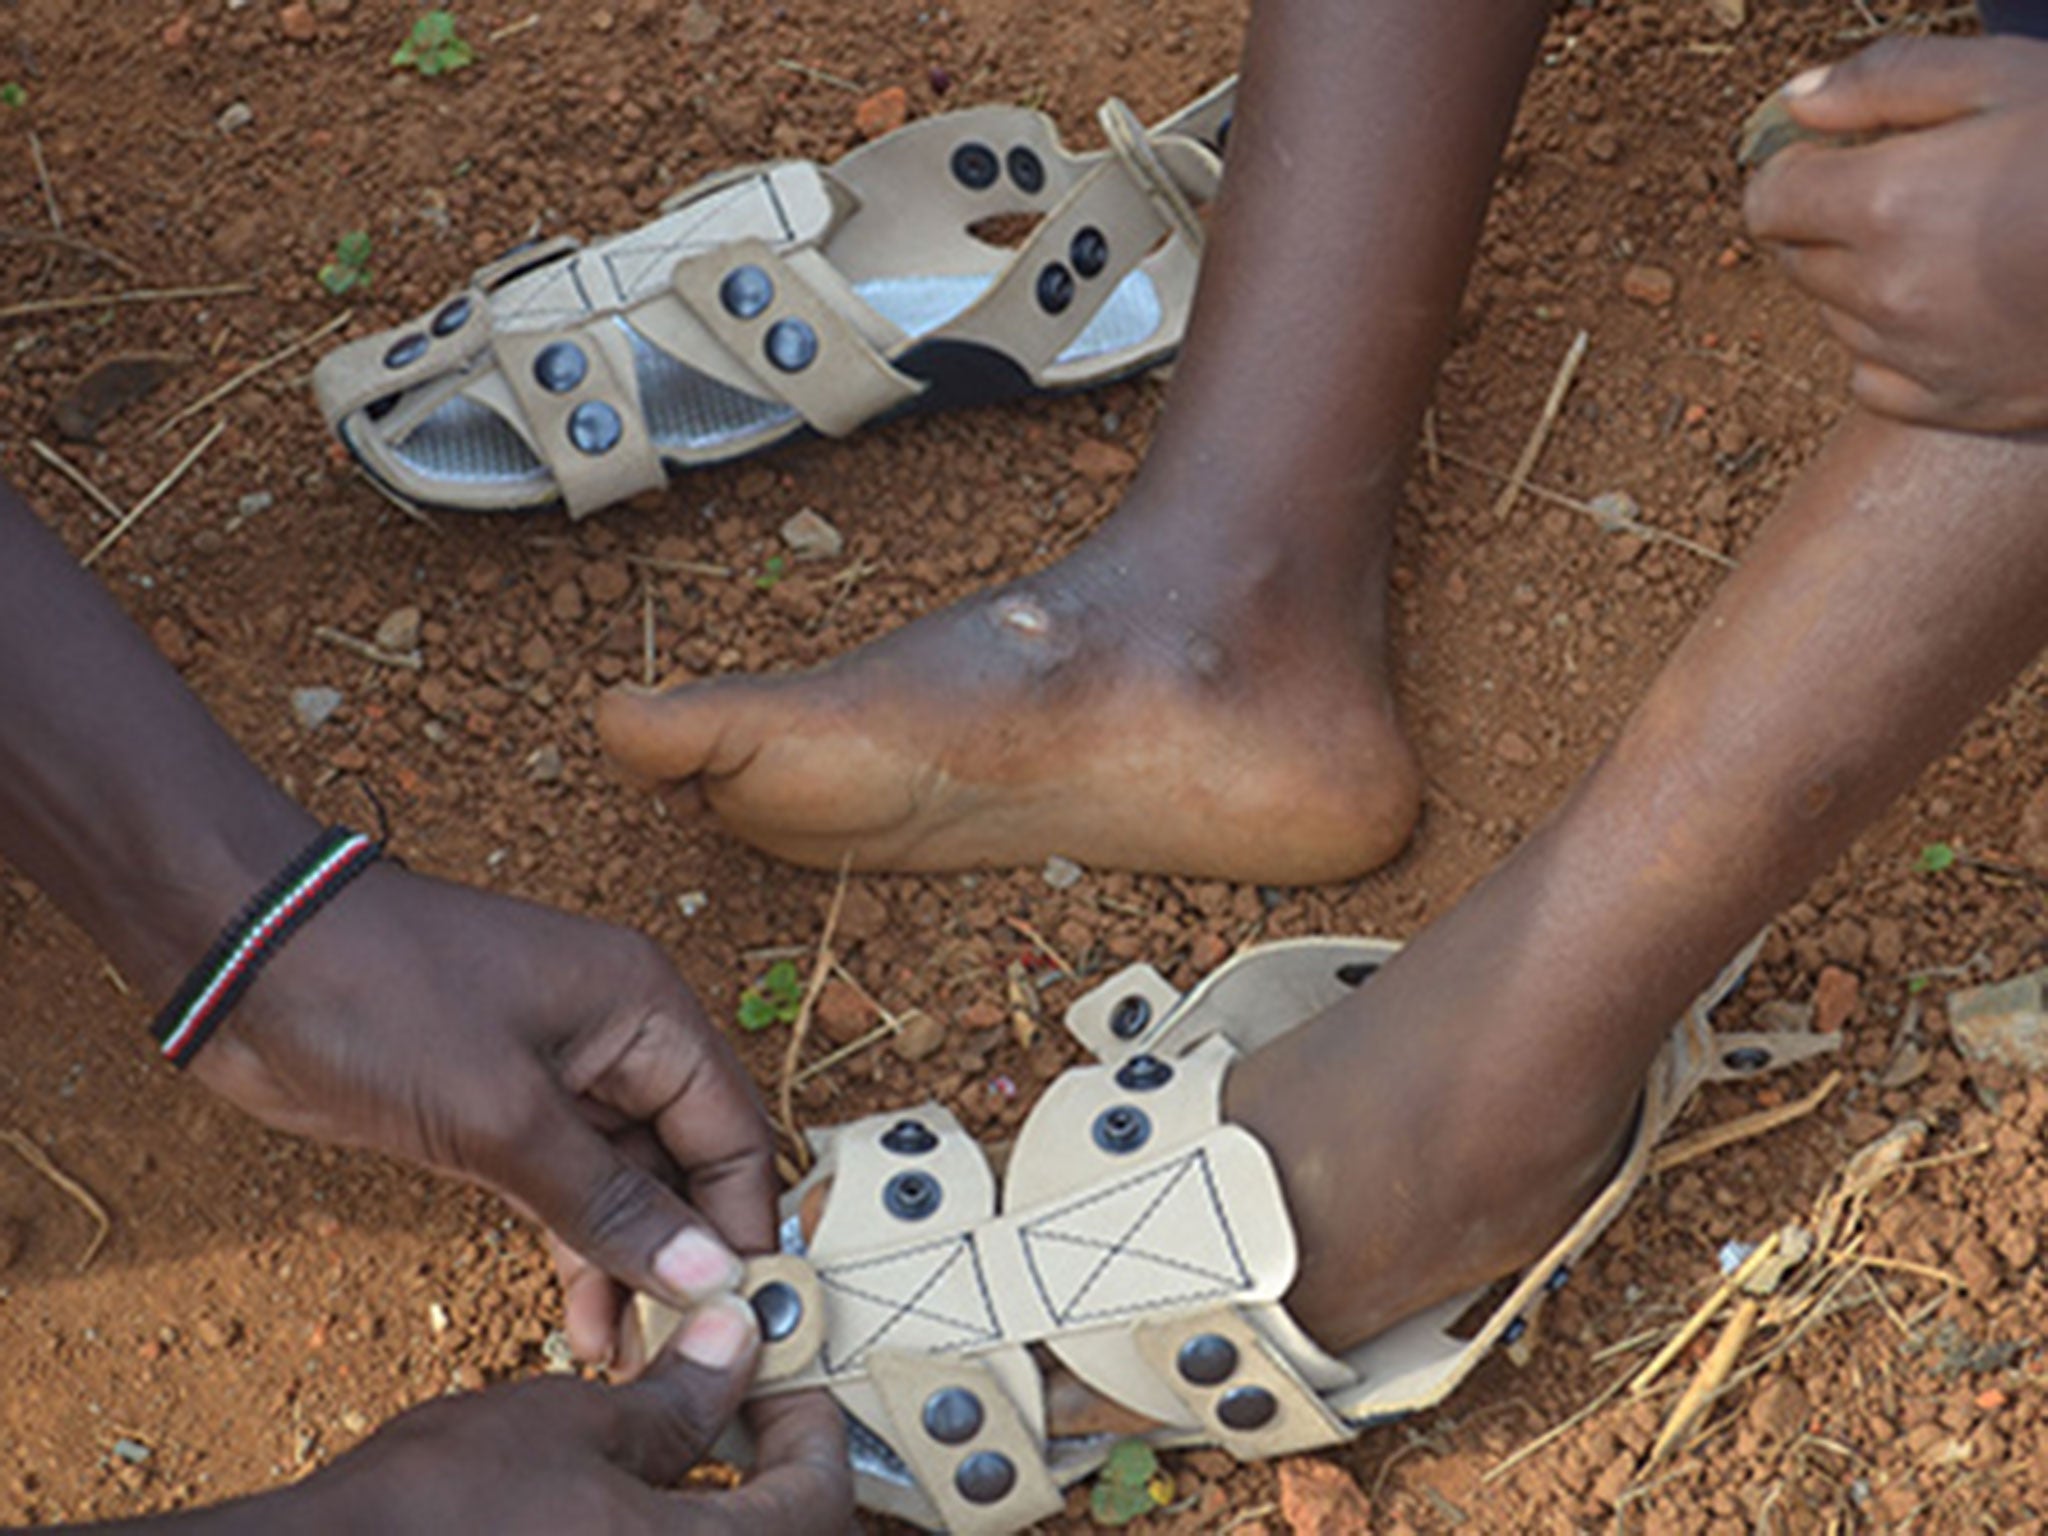 The shoes are currently being distributed in the most needed towns of Ecuador, Haiti, Ghana and Kenya.